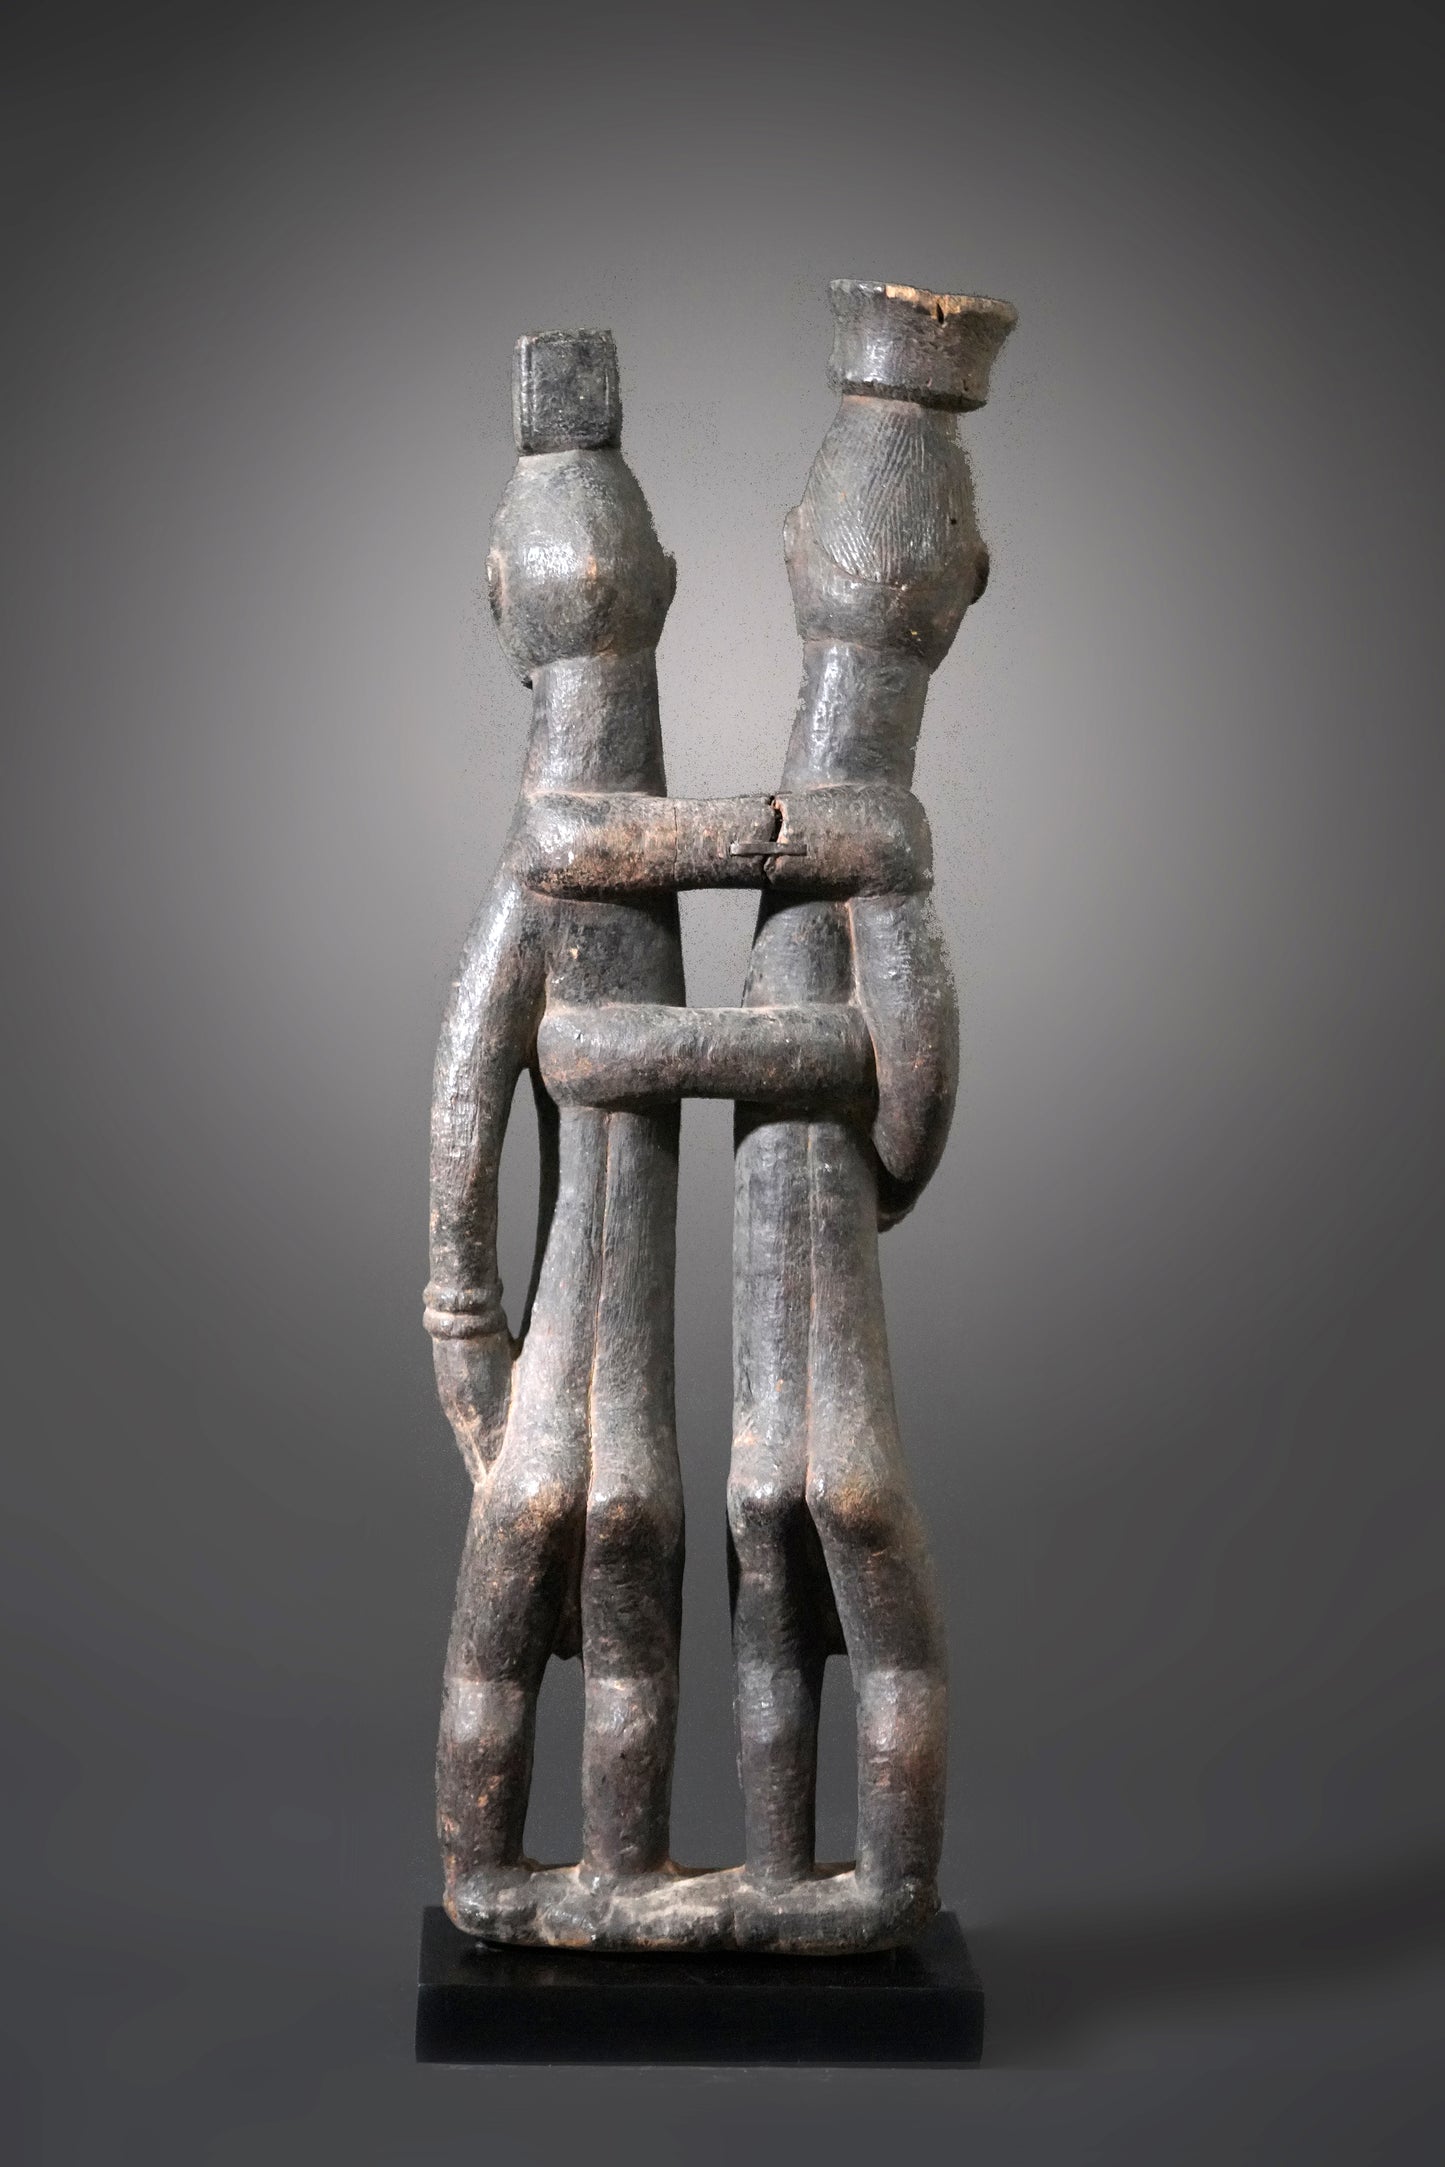 A Guro couple standing on one base